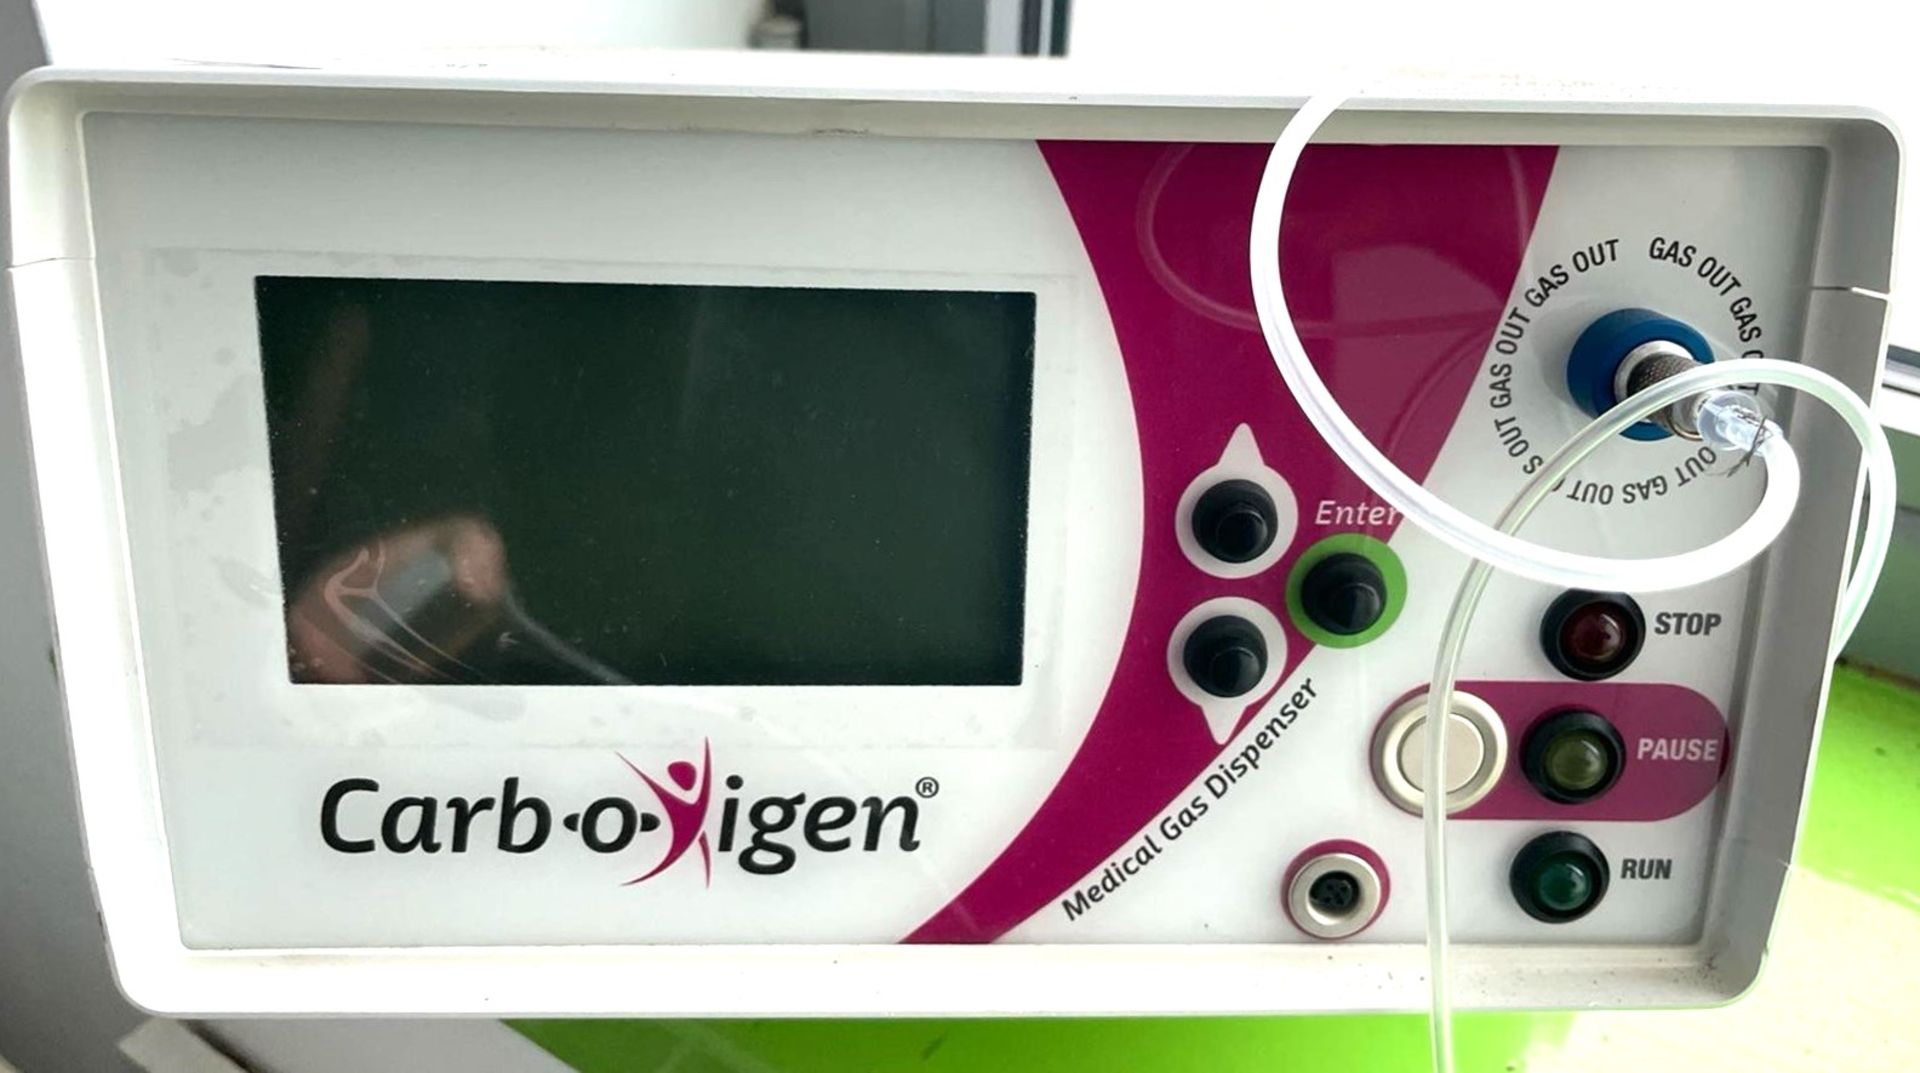 1 x Carb-O-Xygen Table Carboxytherapy Medical Gas Dispenser - For The Sterile and Personalized - Image 4 of 6